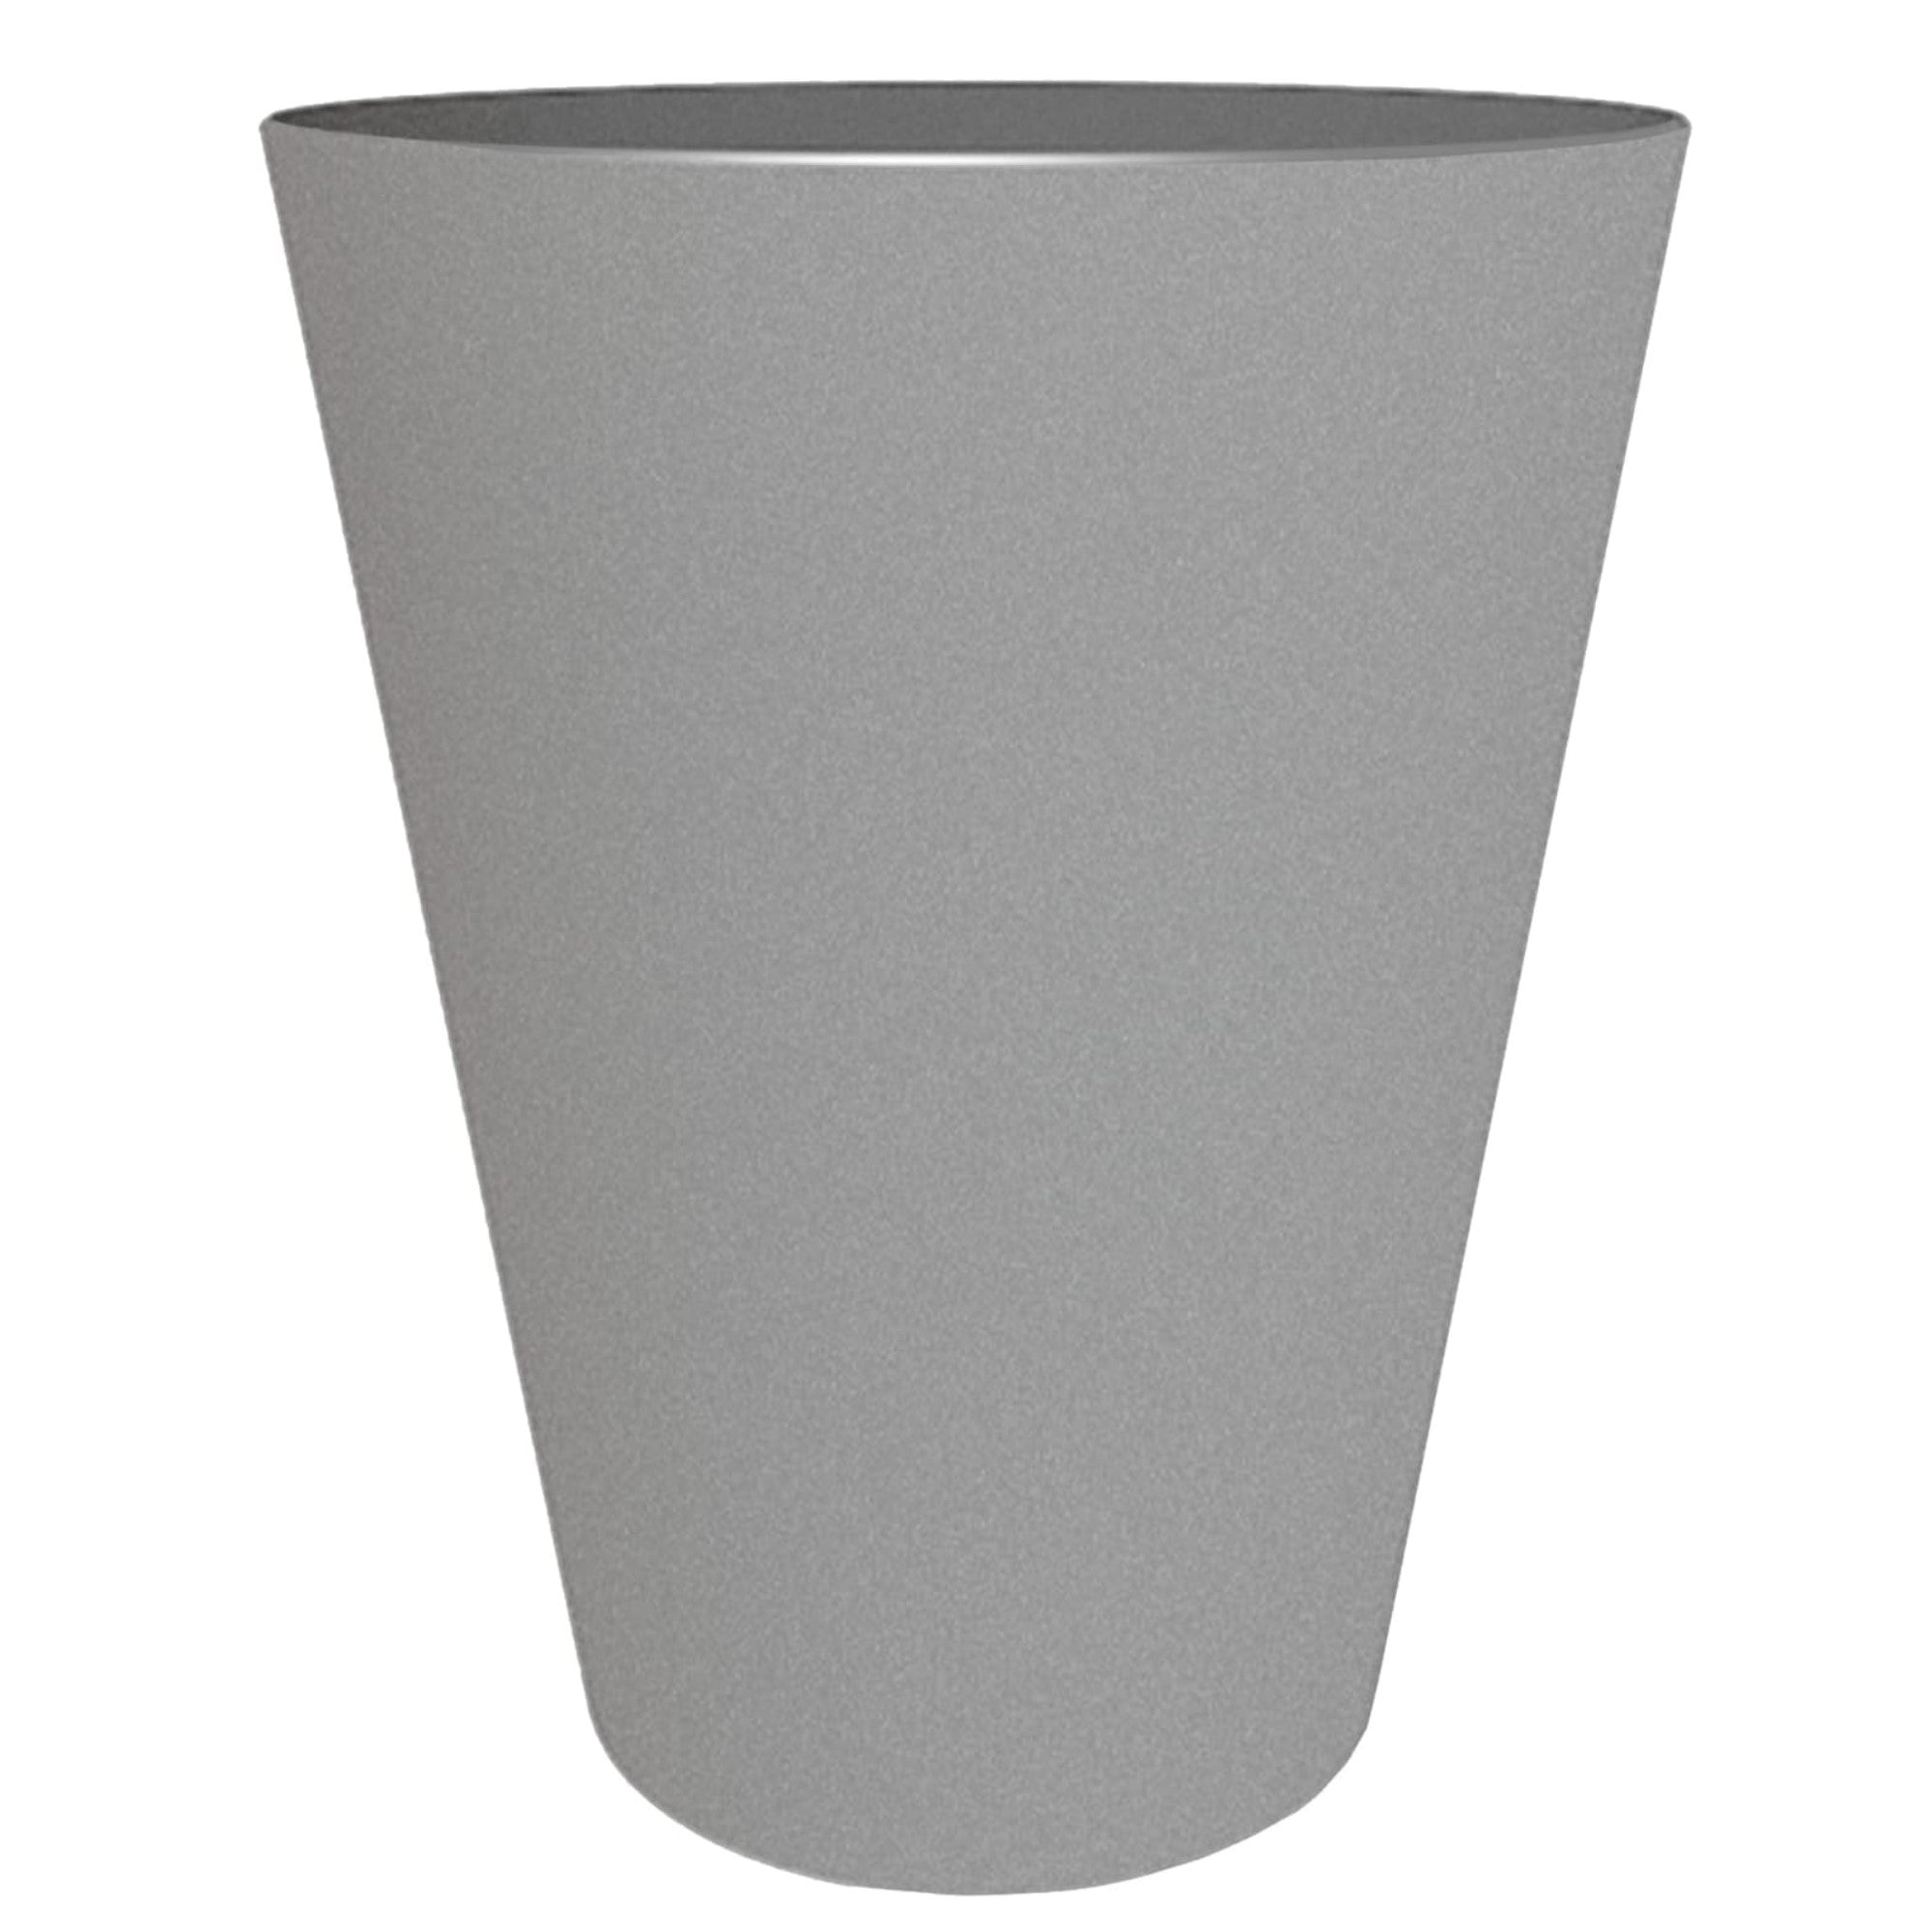 Bloem Indoor/Outdoor Tall Finley Tapered Round, 100% Recycled Plastic Pot, Cement Color, 4 Gallon Soil Capacity, 14”